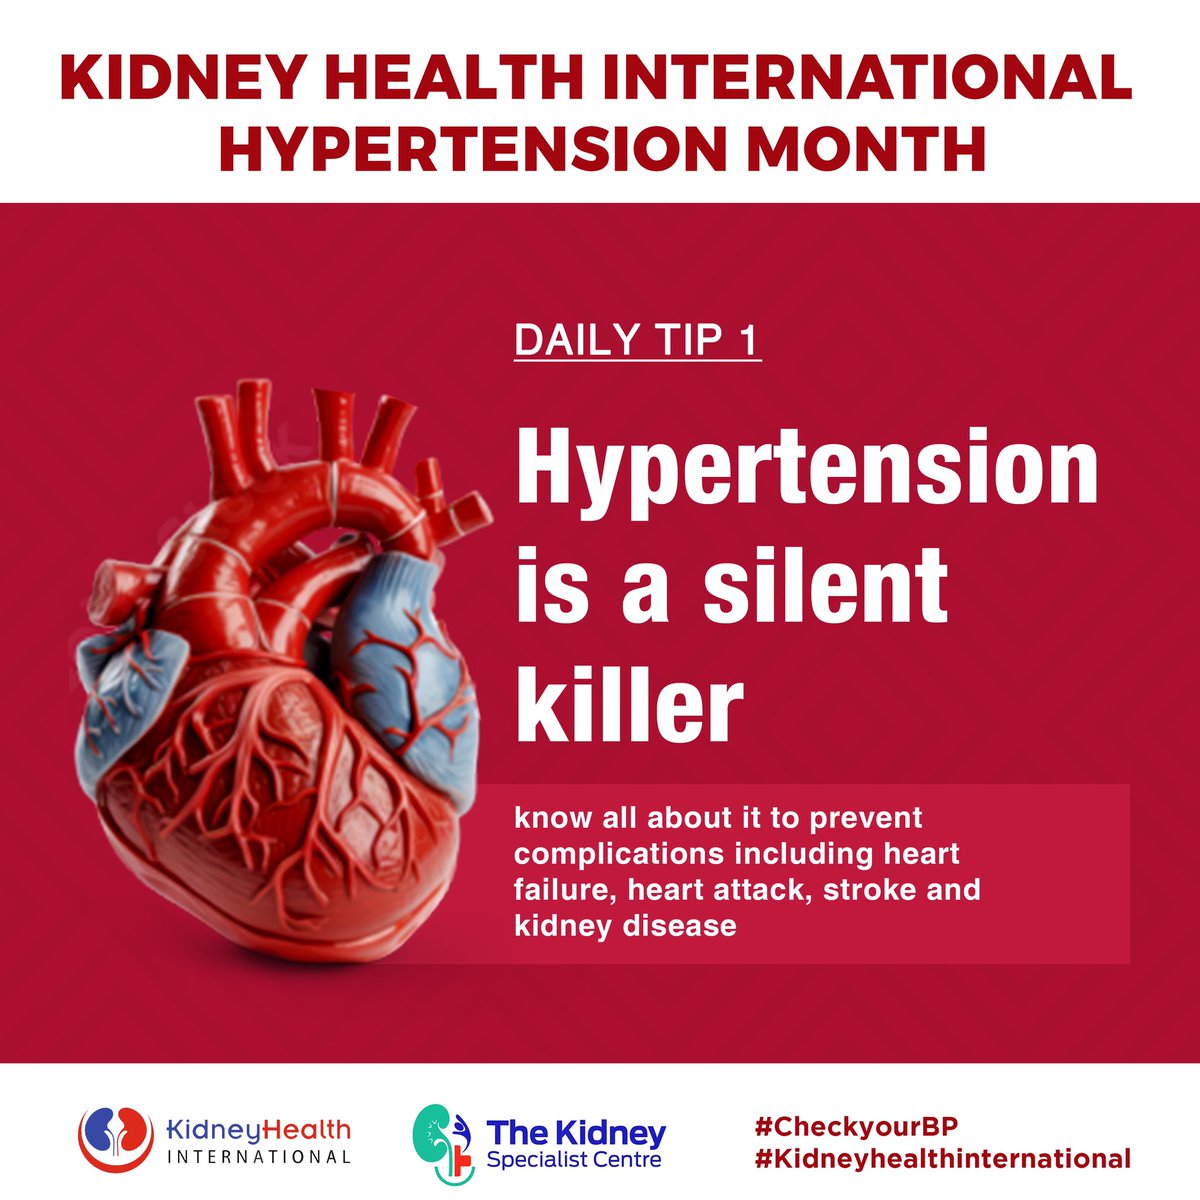 In most cases, hypertension does not show any symptoms and may lead to complications and death. It’s a silent killer! Educate yourself, get tested and keep it controlled at all times to prevent complications. #CheckYourBloodPressure #kidneyhealthinternational #HypertensionMonth